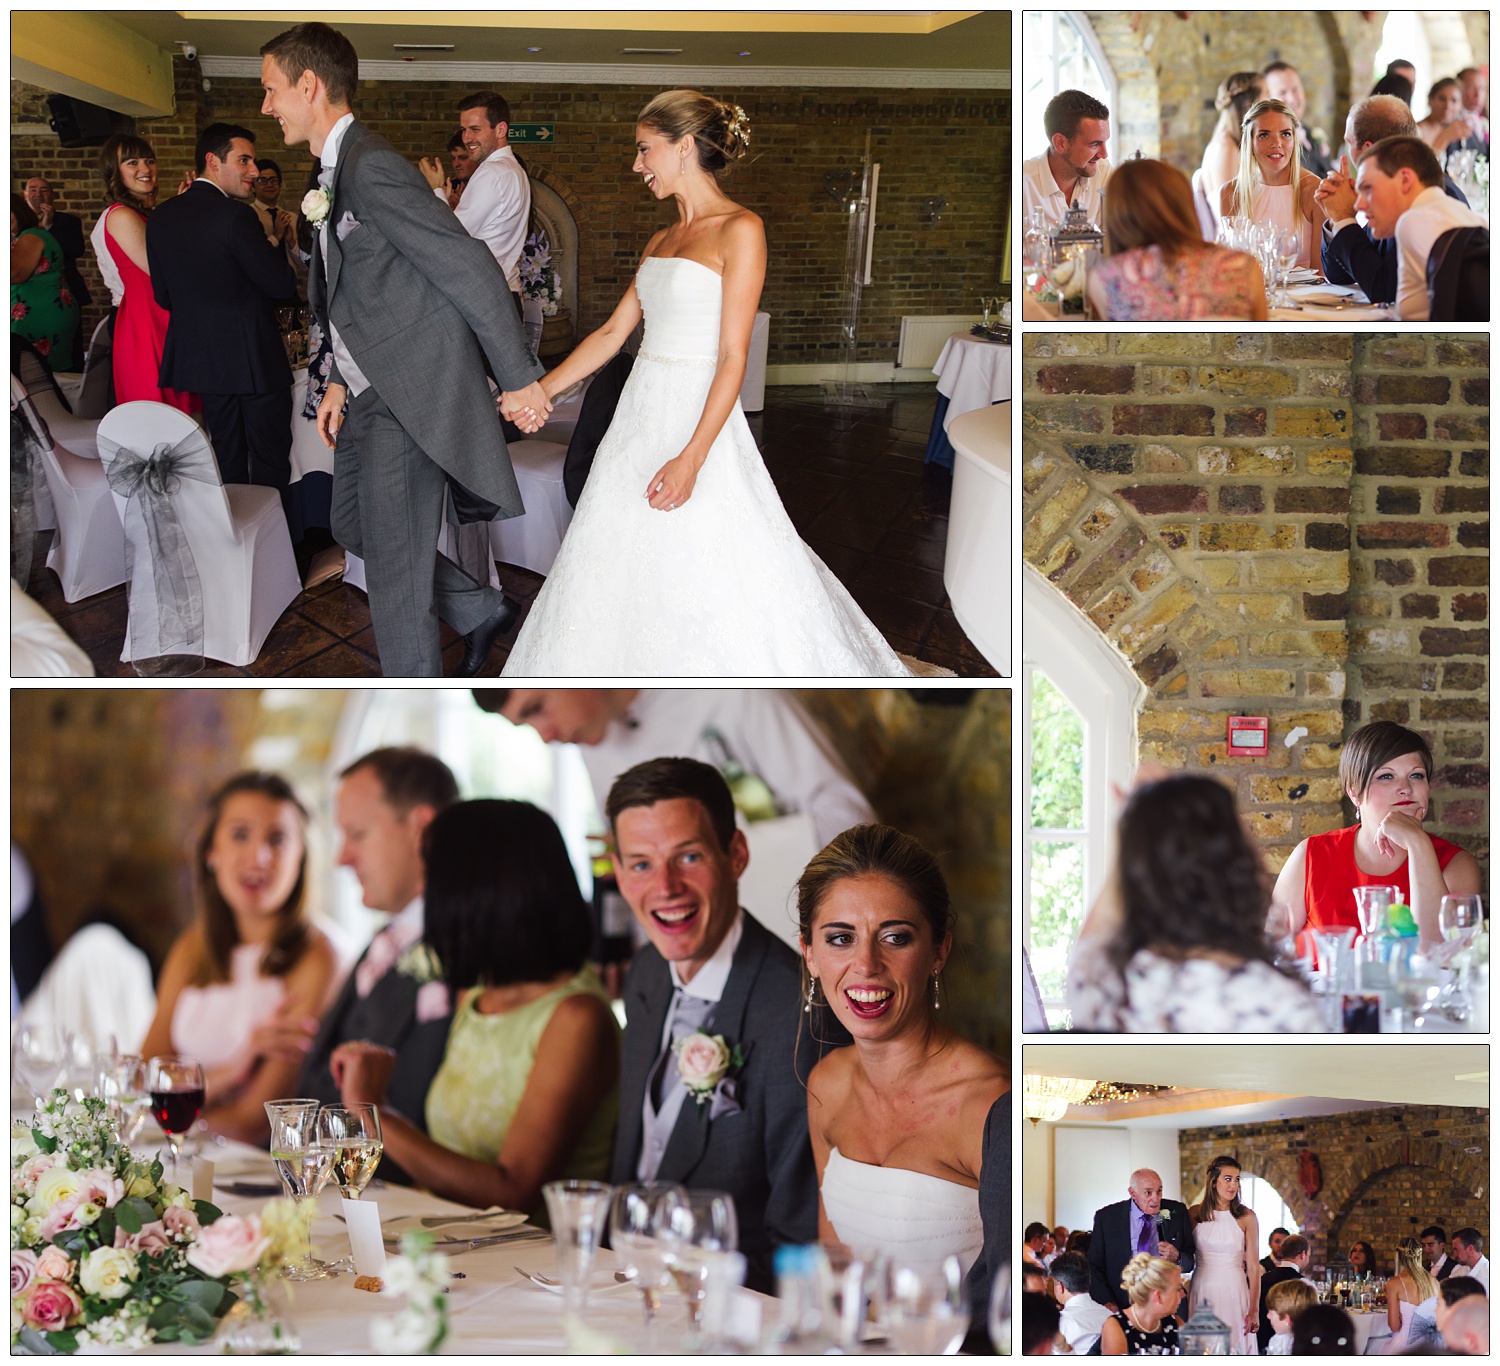 Bride and groom enter the room at Friern Manor.